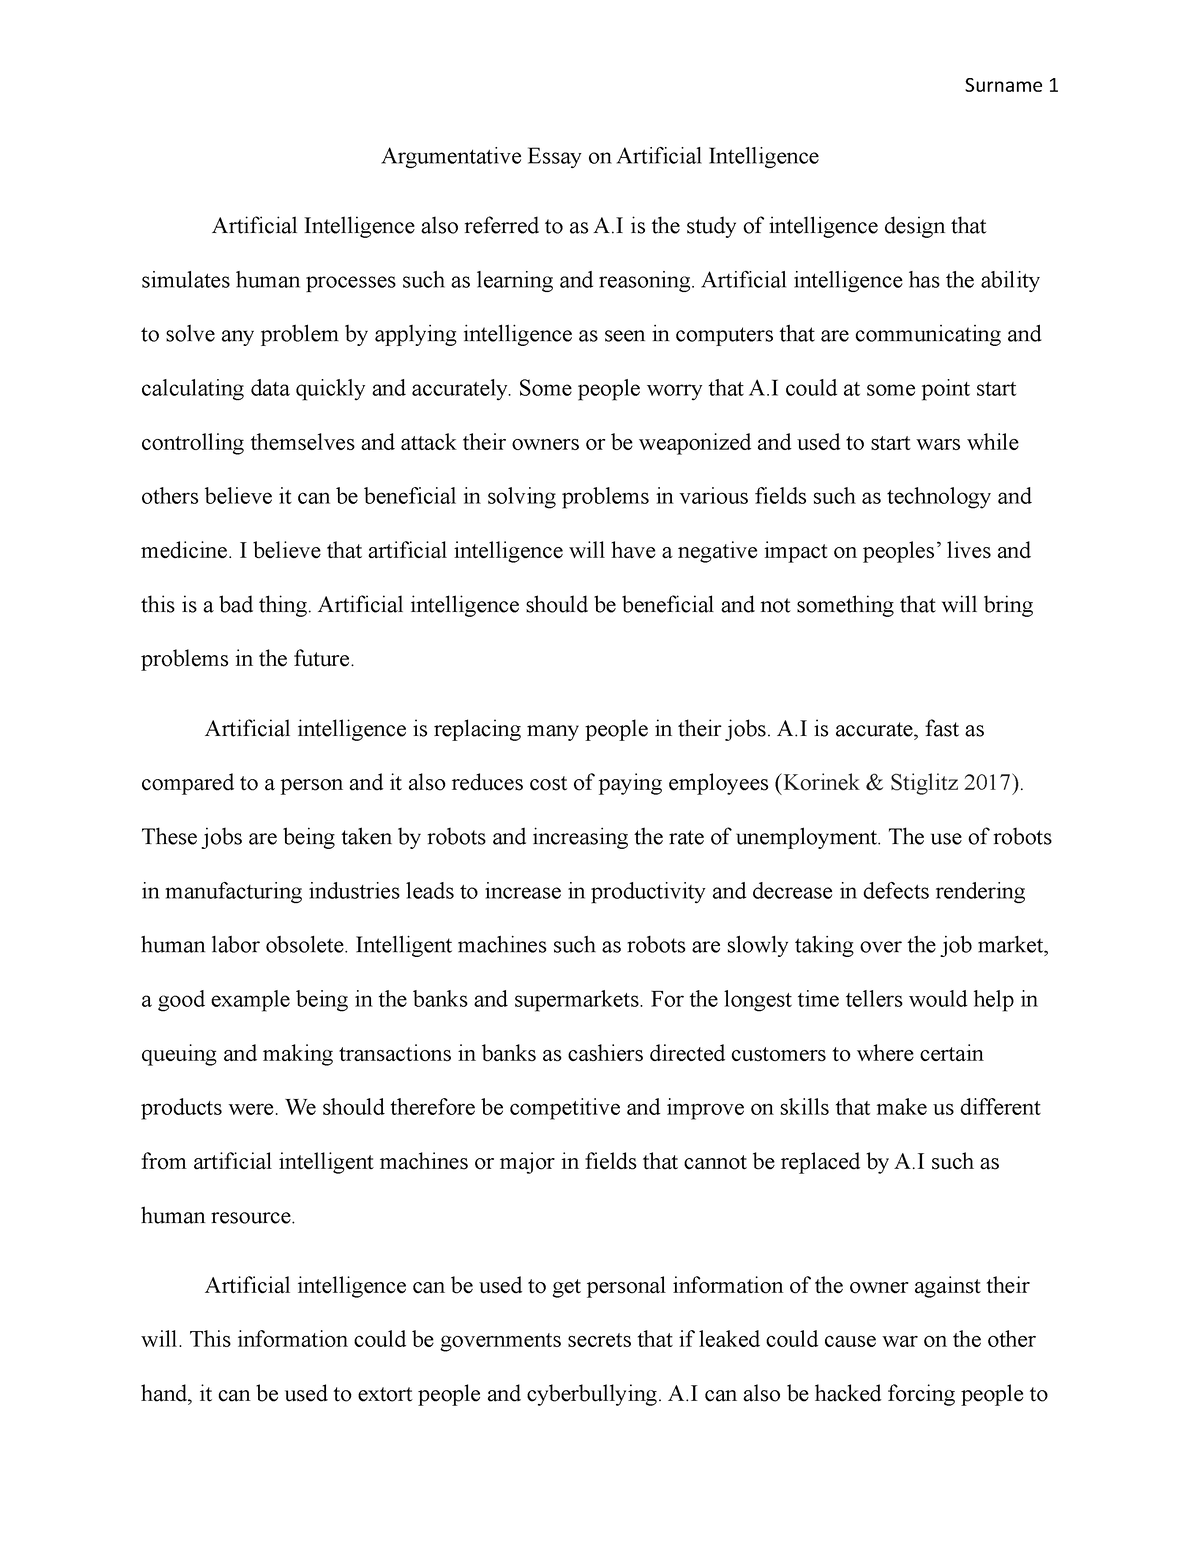 artificial intelligence extended essay